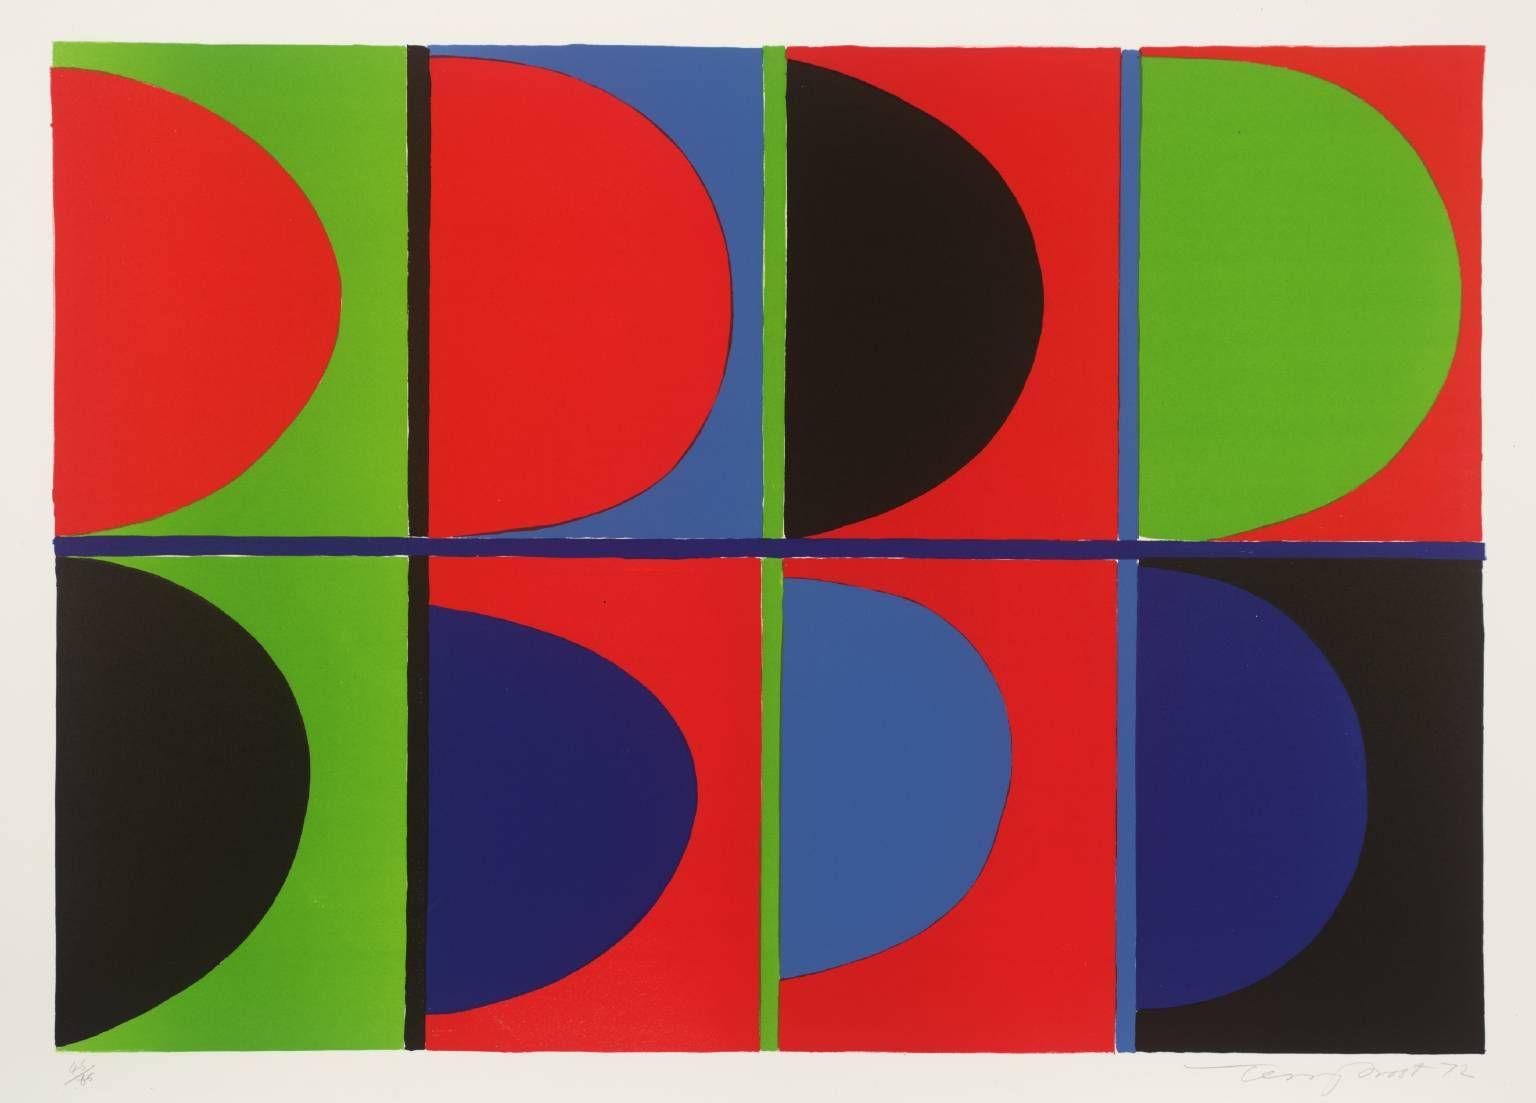 Red Blue Green Logo - Red, Blue, Green', Sir Terry Frost, 1972 | Tate